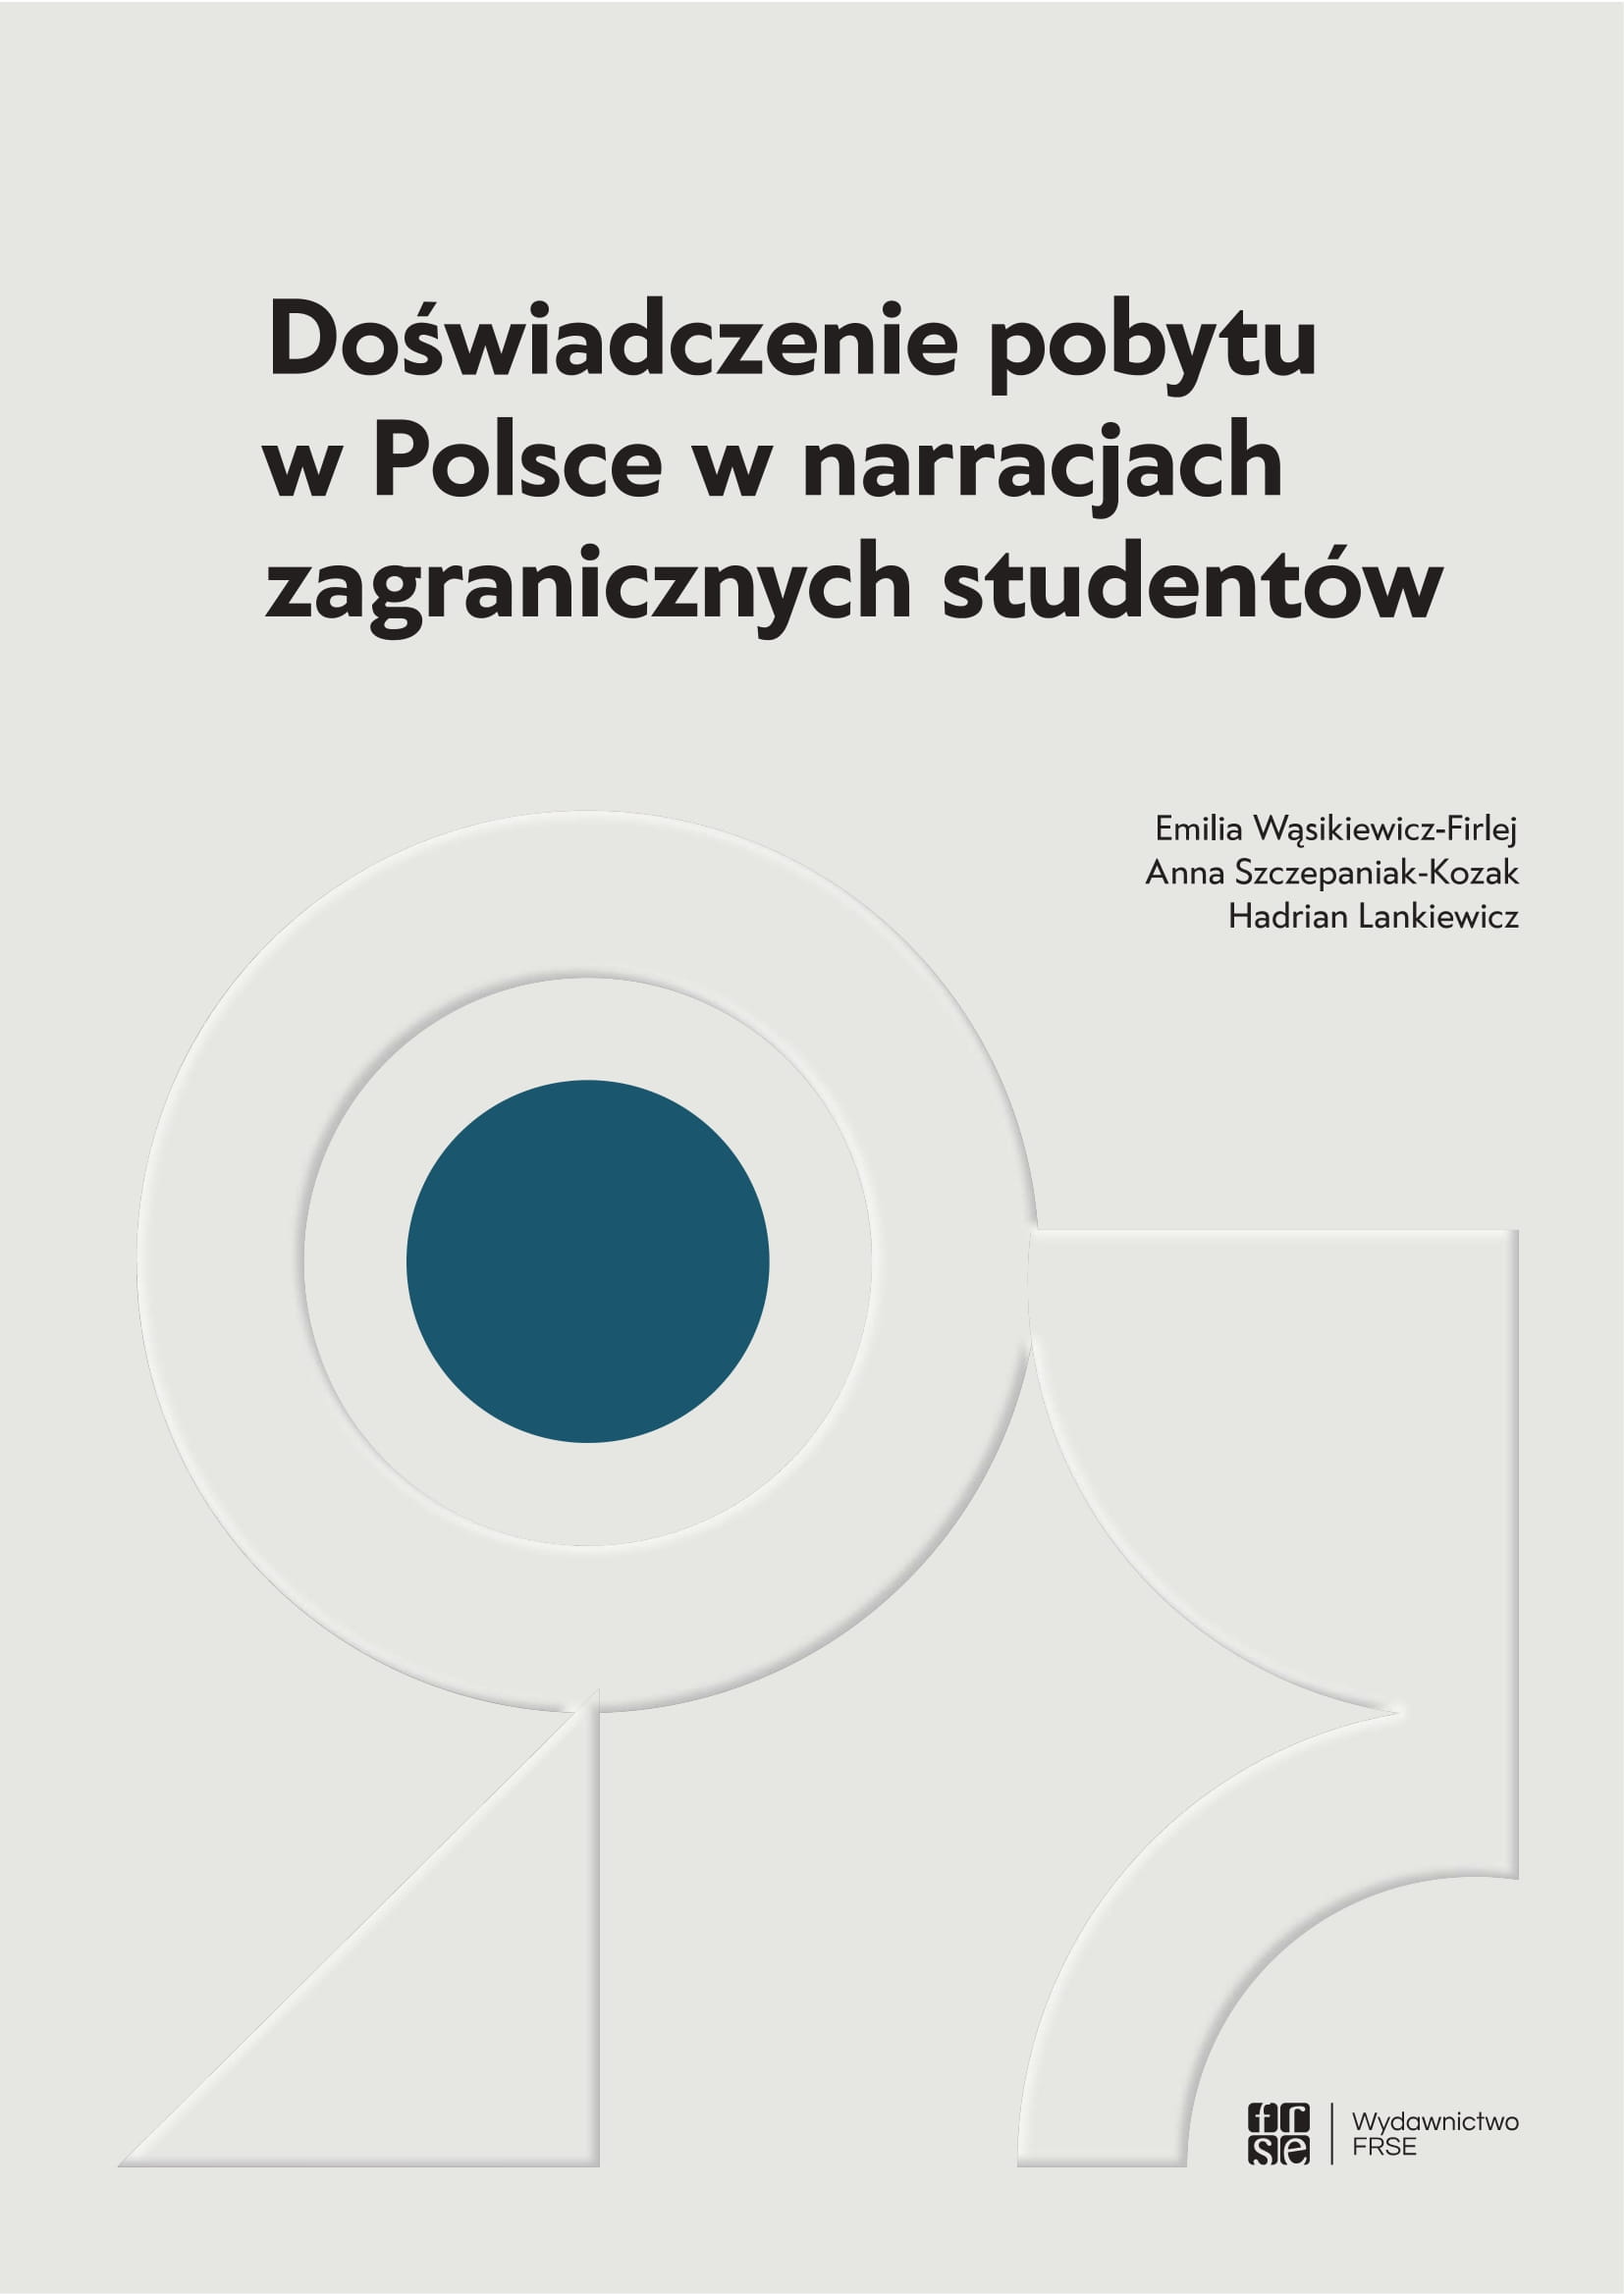 The experience of staying in Poland in the narratives of foreign students